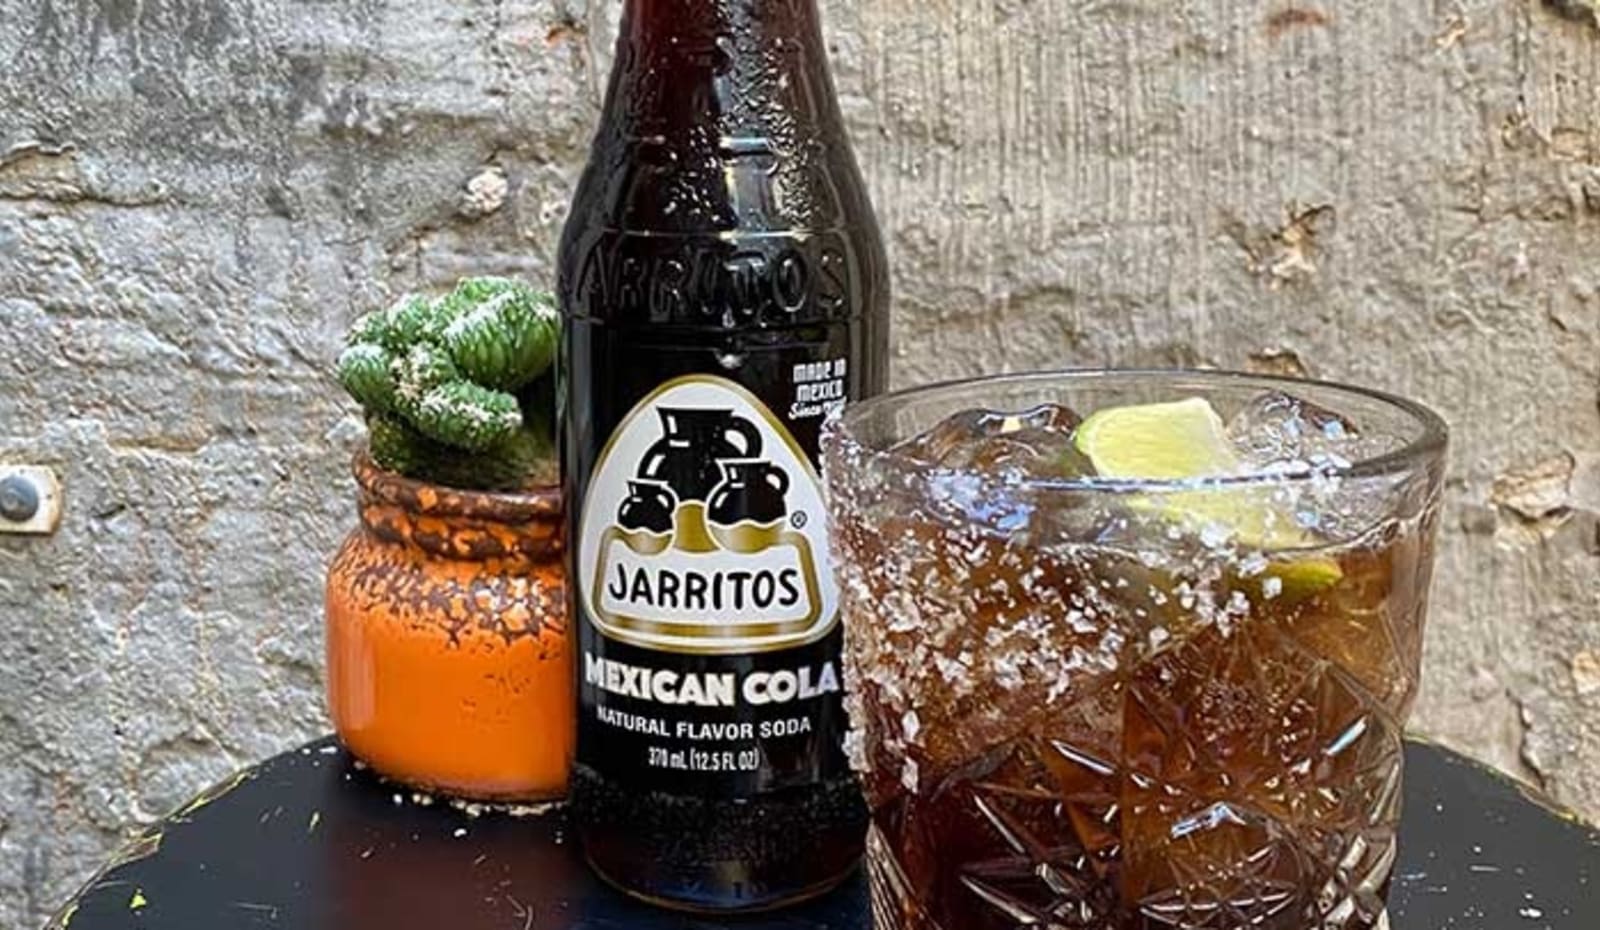 A glass of Charro Negro on a table next to a bottle of Jarritos Mexican Cola